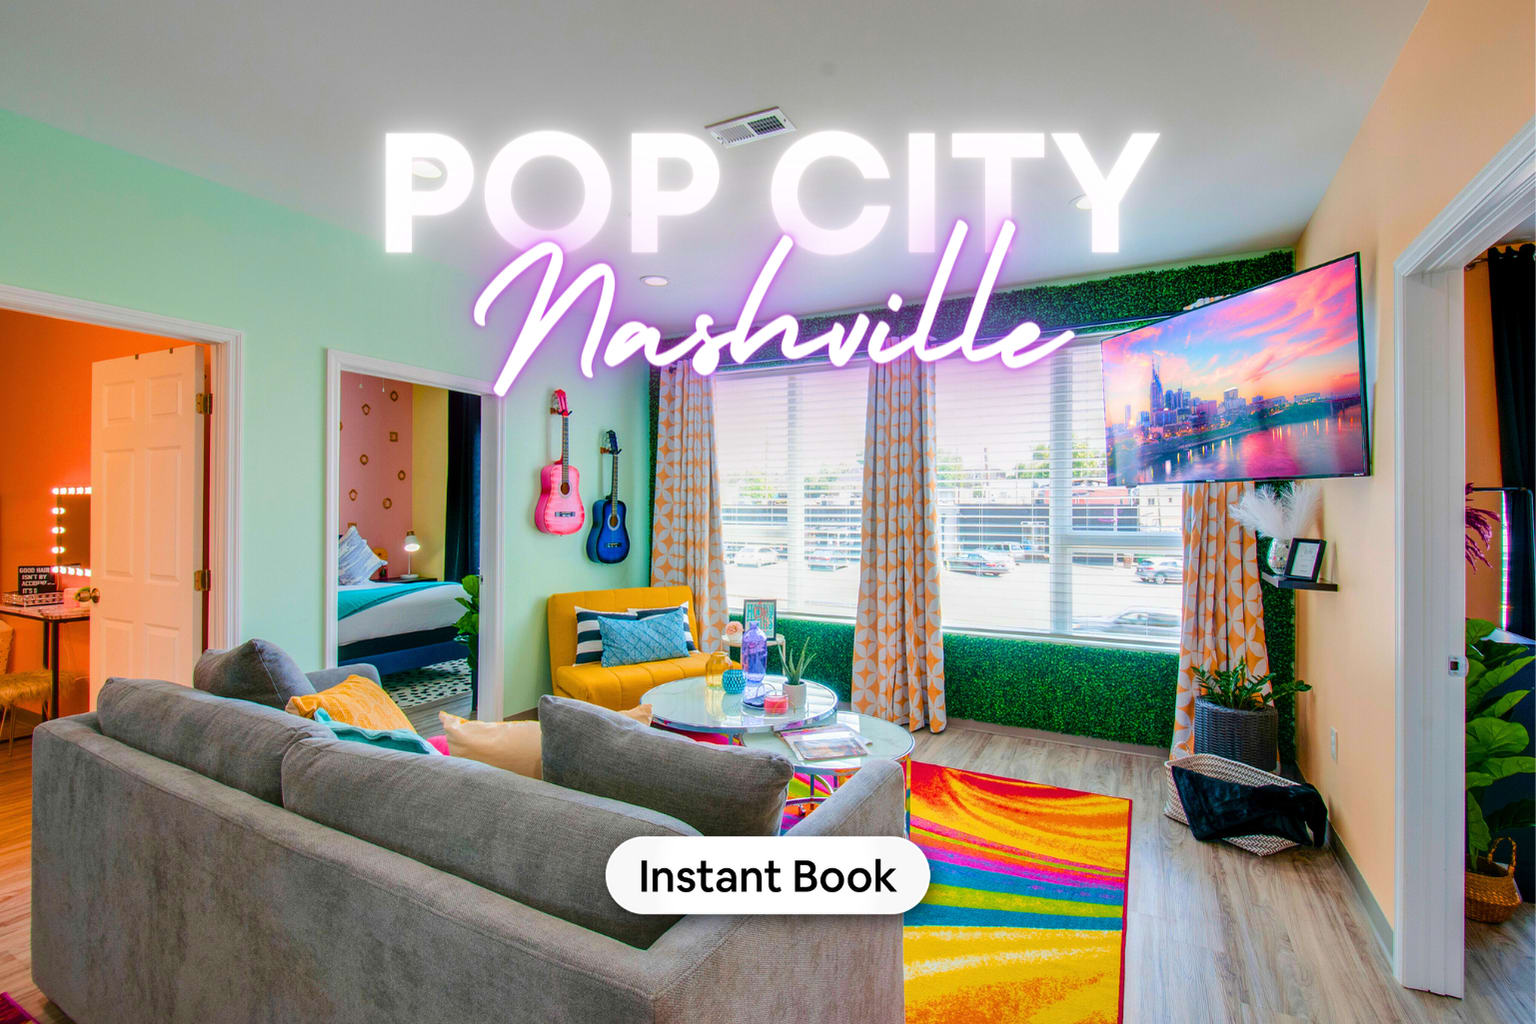 Imagine lounging in this vibrant living space with neon lights spelling out 'POP CITY Nashville,' setting the stage for an unforgettable Music City experience. Perfect for any Nashville-bound group, be it a bachelorette blowout or a family getaway, this luxury vacation rental boasts a playful vibe and a prime location. The bold colors and musical touches invite you to relax in style or prep for a night out. Soak up the Nashville spirit right from your couch—Misfit Homes awaits your stay. Book today and dive into your next vacation adventure! 🎸✨